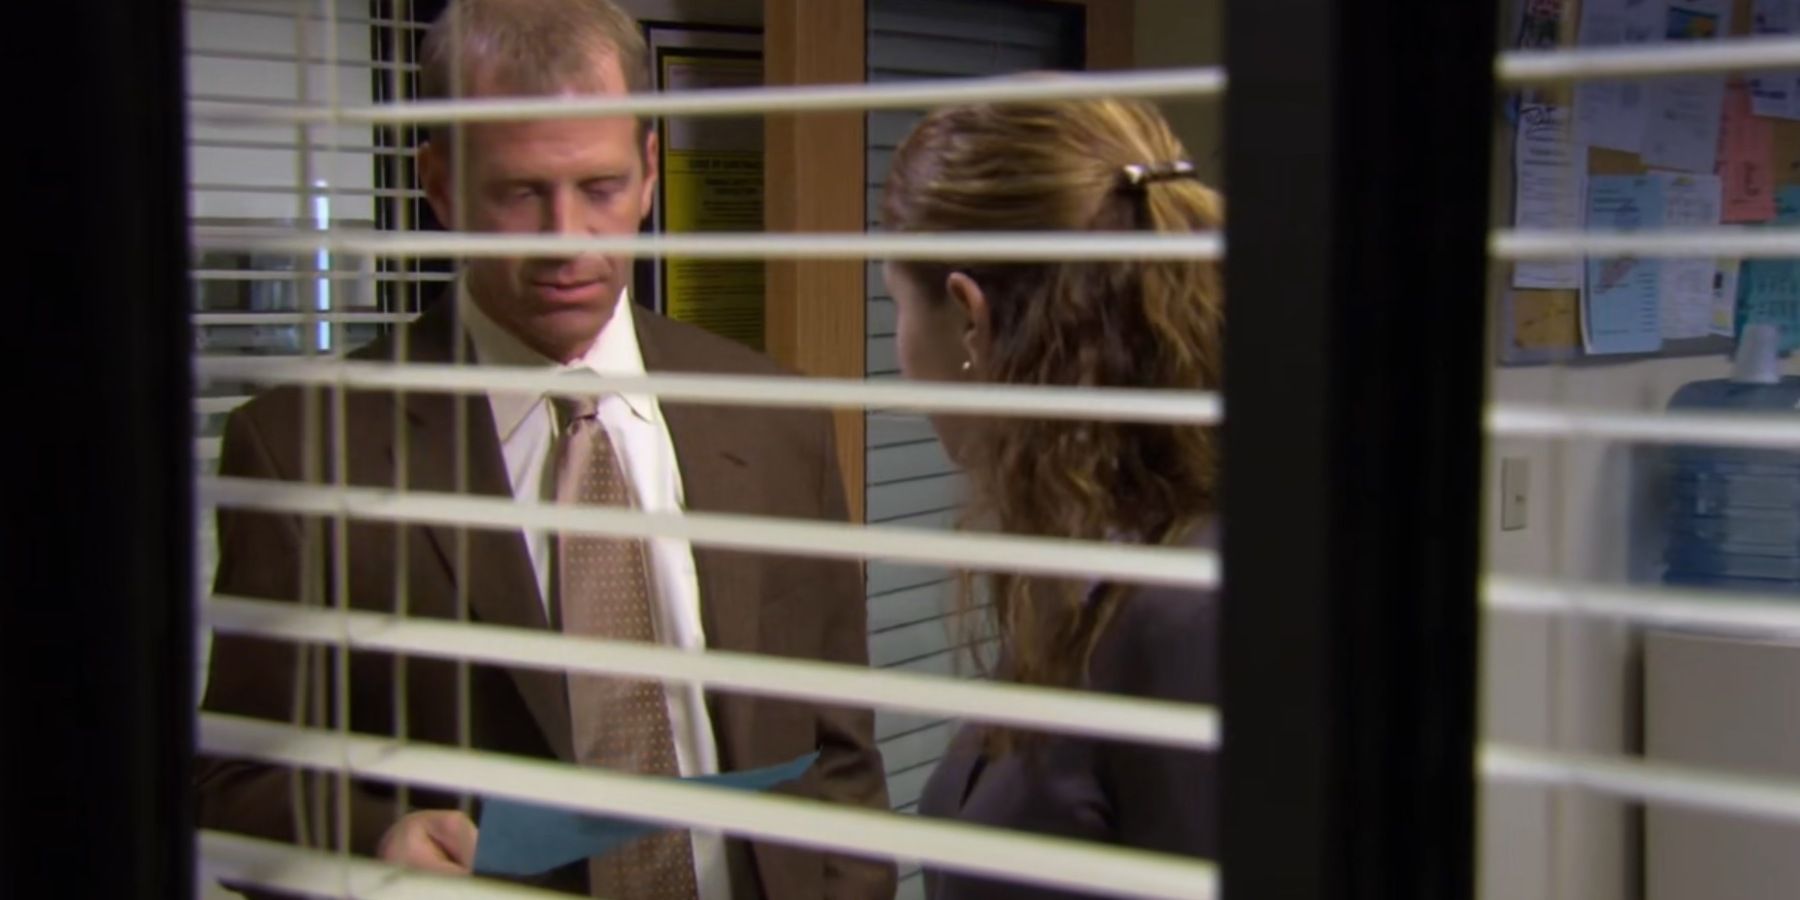 The Office Toby almost ditched his daughters play to attend Pam's art show